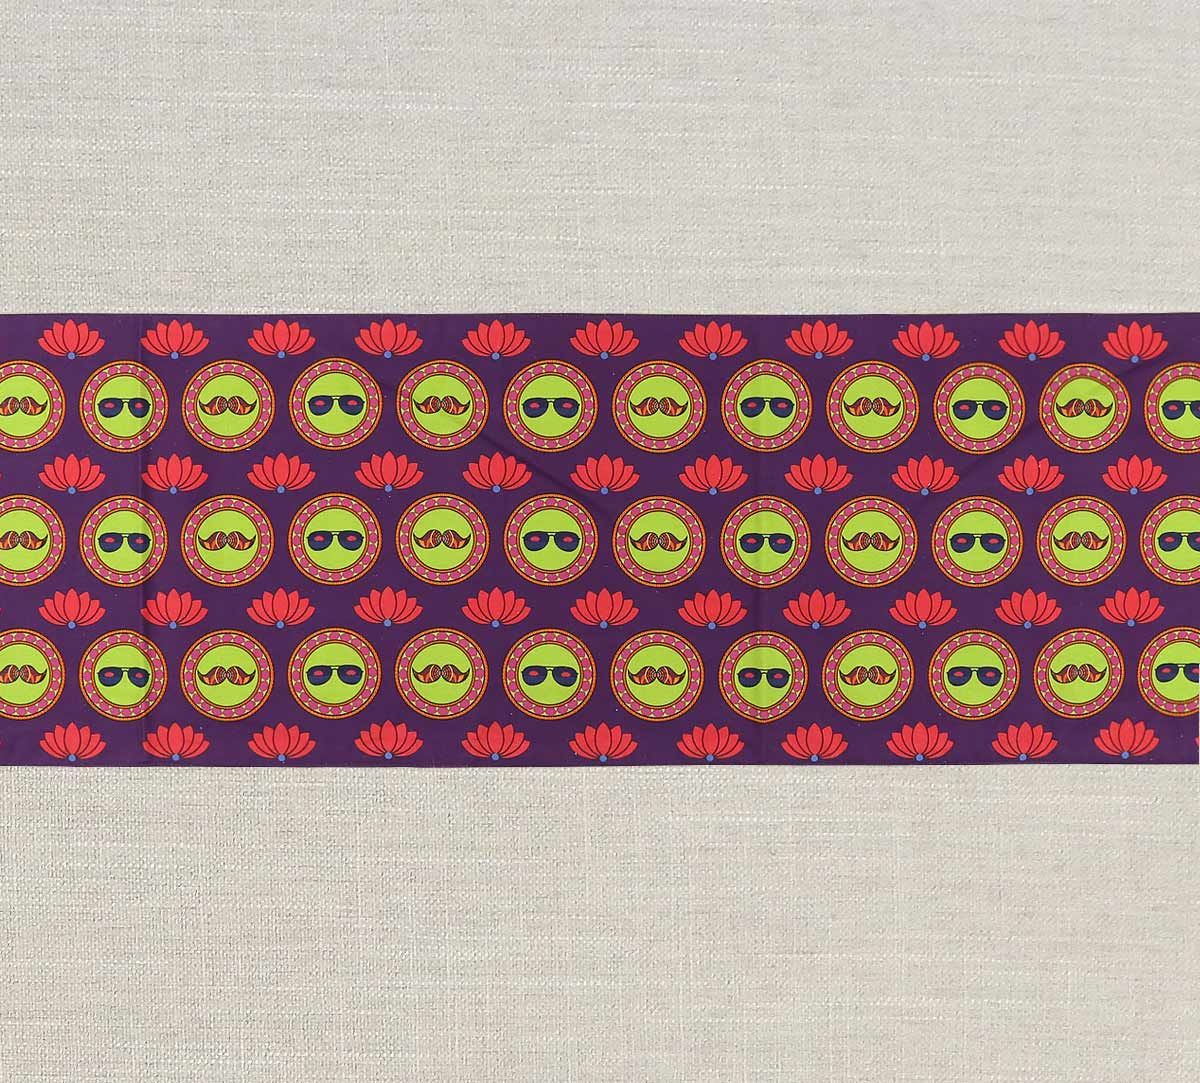 India Circus C'est La Vie Bed Runner and Table Runner